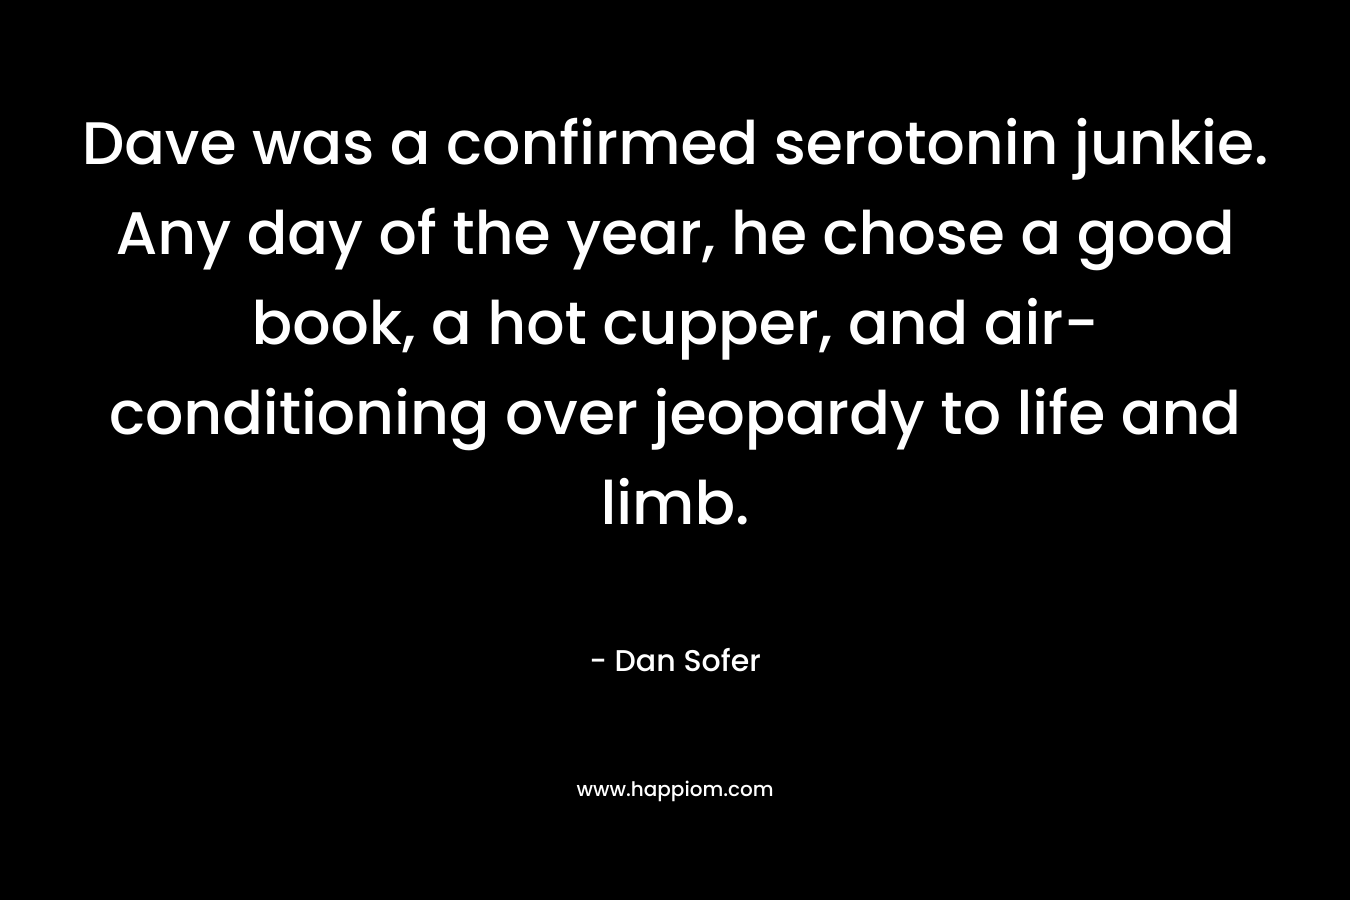 Dave was a confirmed serotonin junkie. Any day of the year, he chose a good book, a hot cupper, and air-conditioning over jeopardy to life and limb. – Dan Sofer